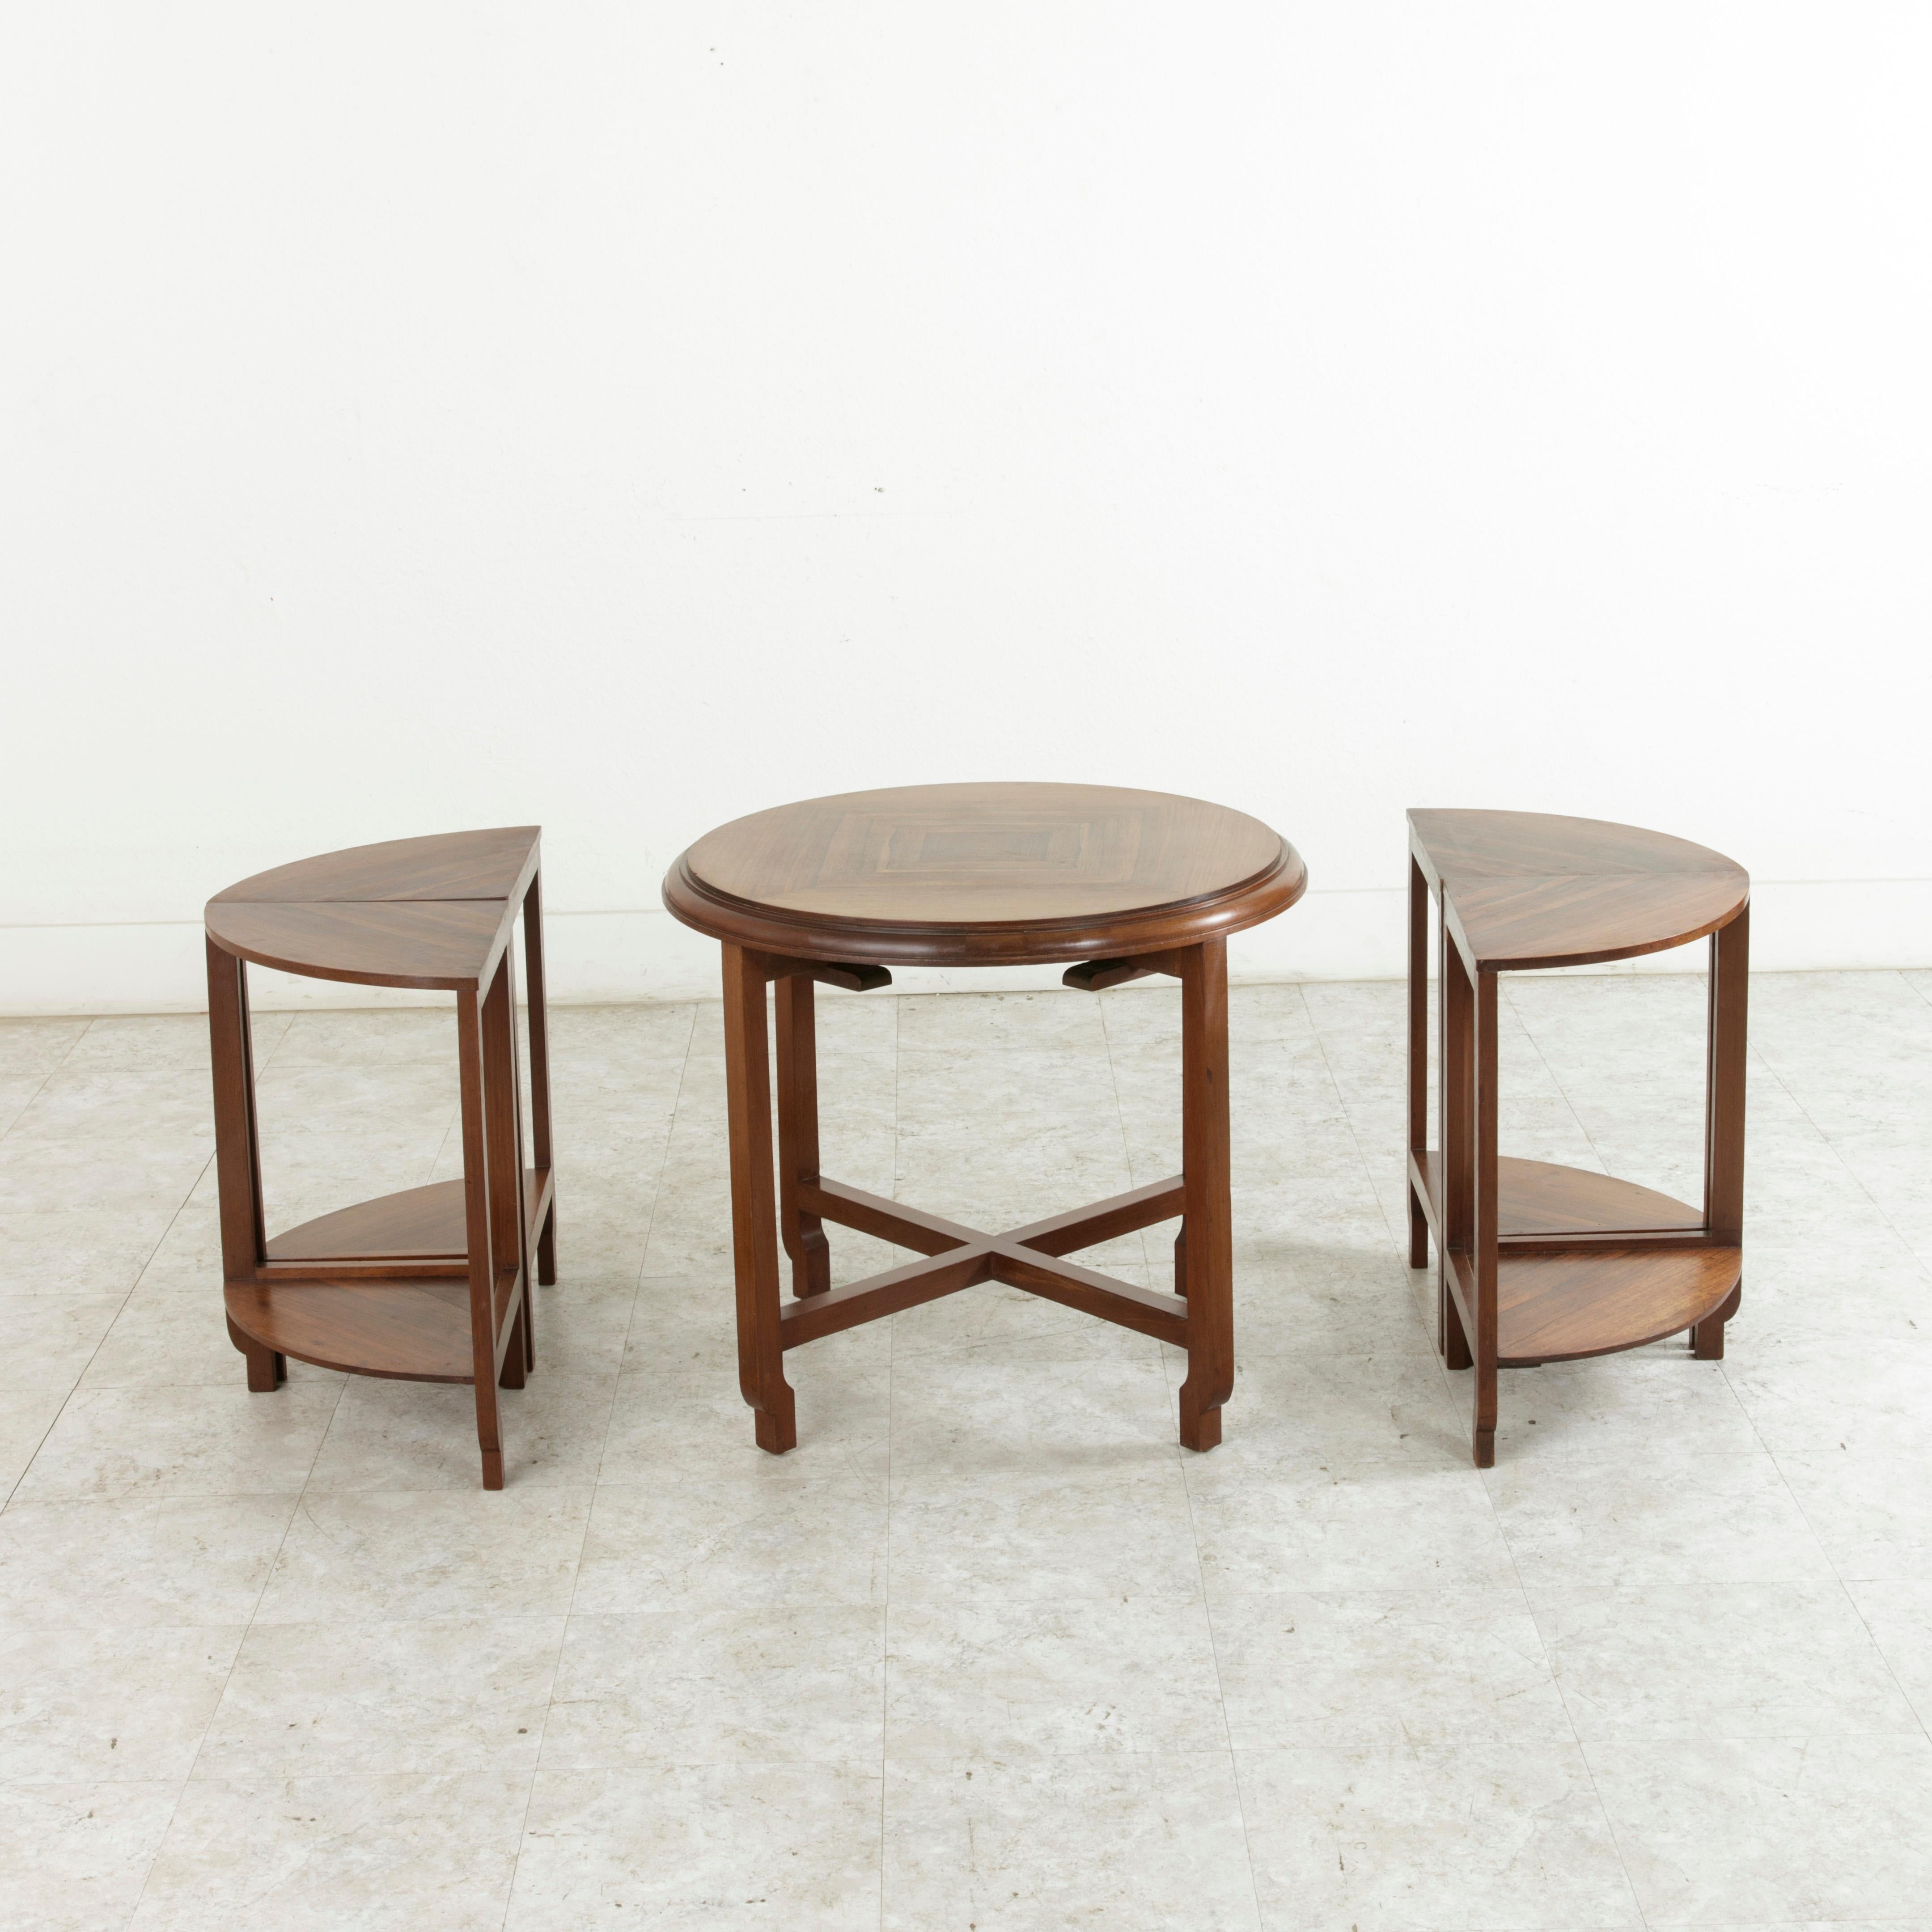 Early 20th Century French Art Deco Louis Majorelle Coffee Table, Nesting Tables For Sale 6